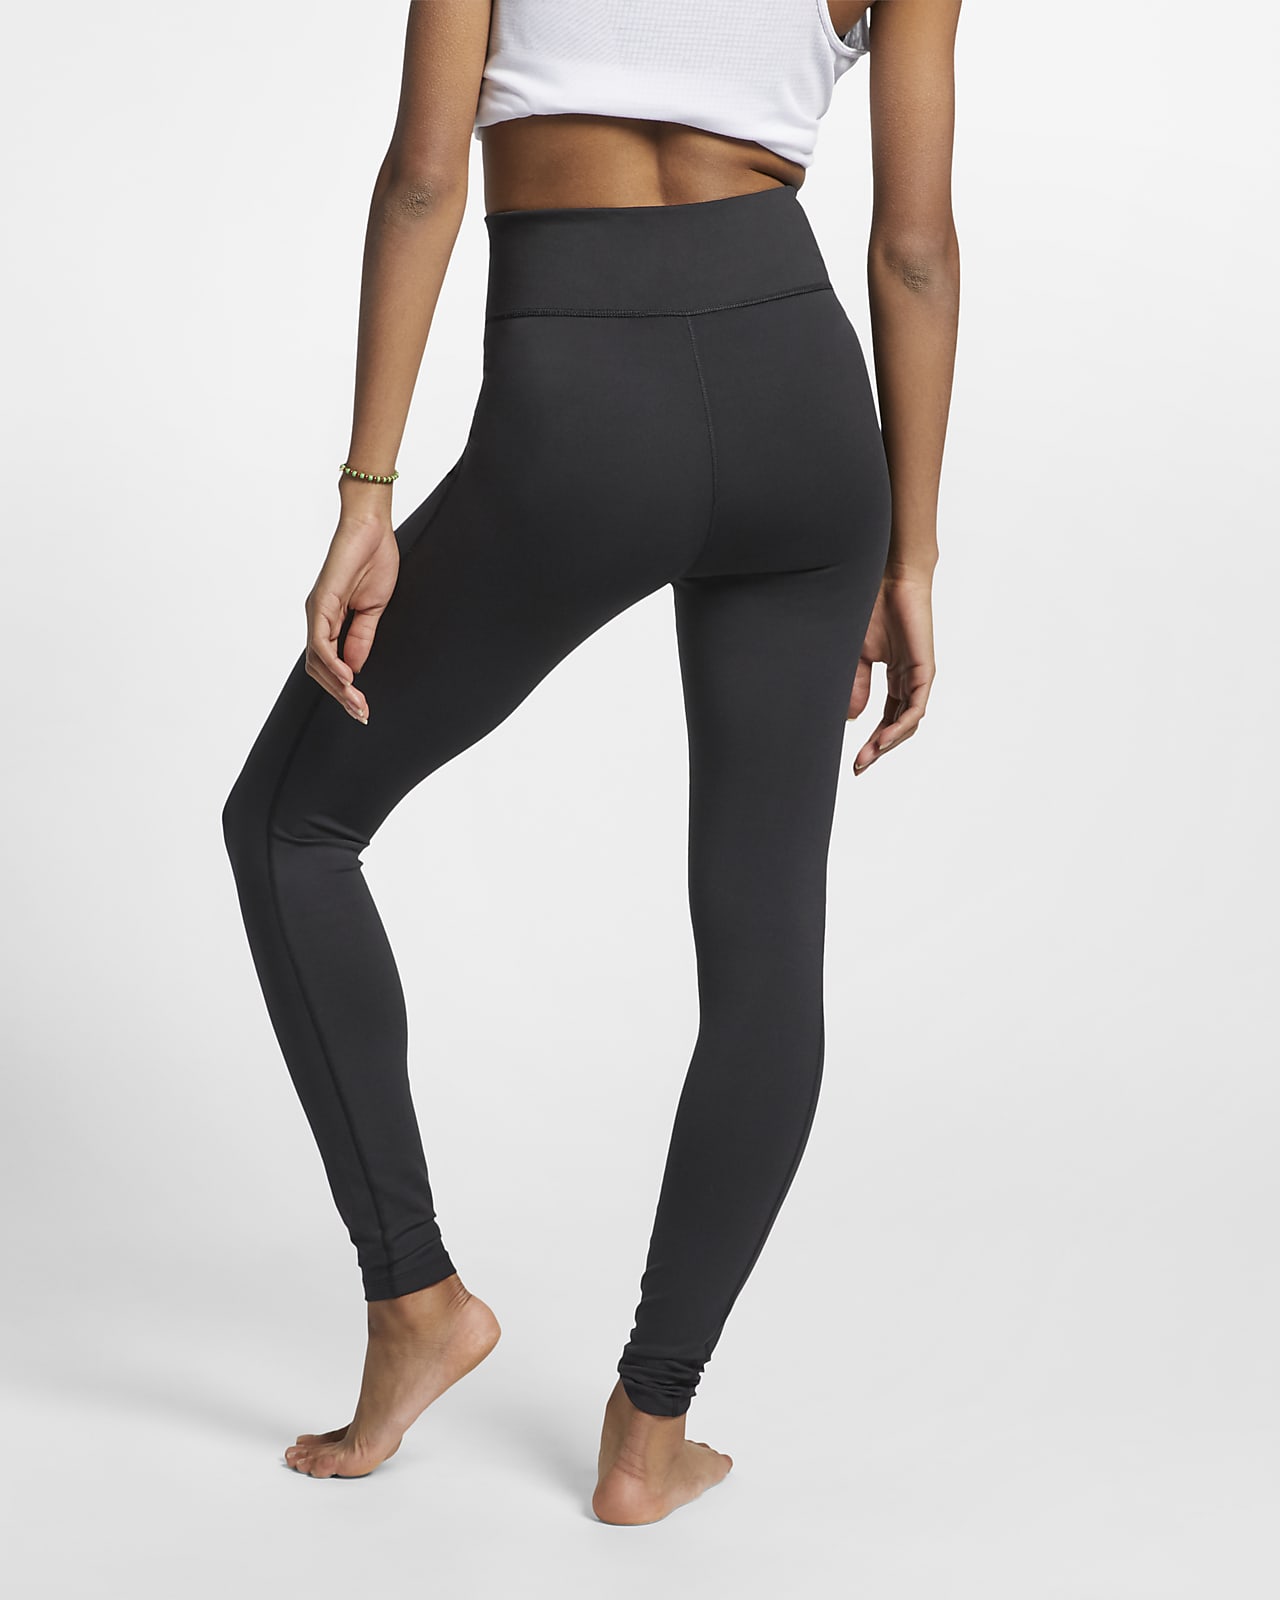 nike fly victory tight fit